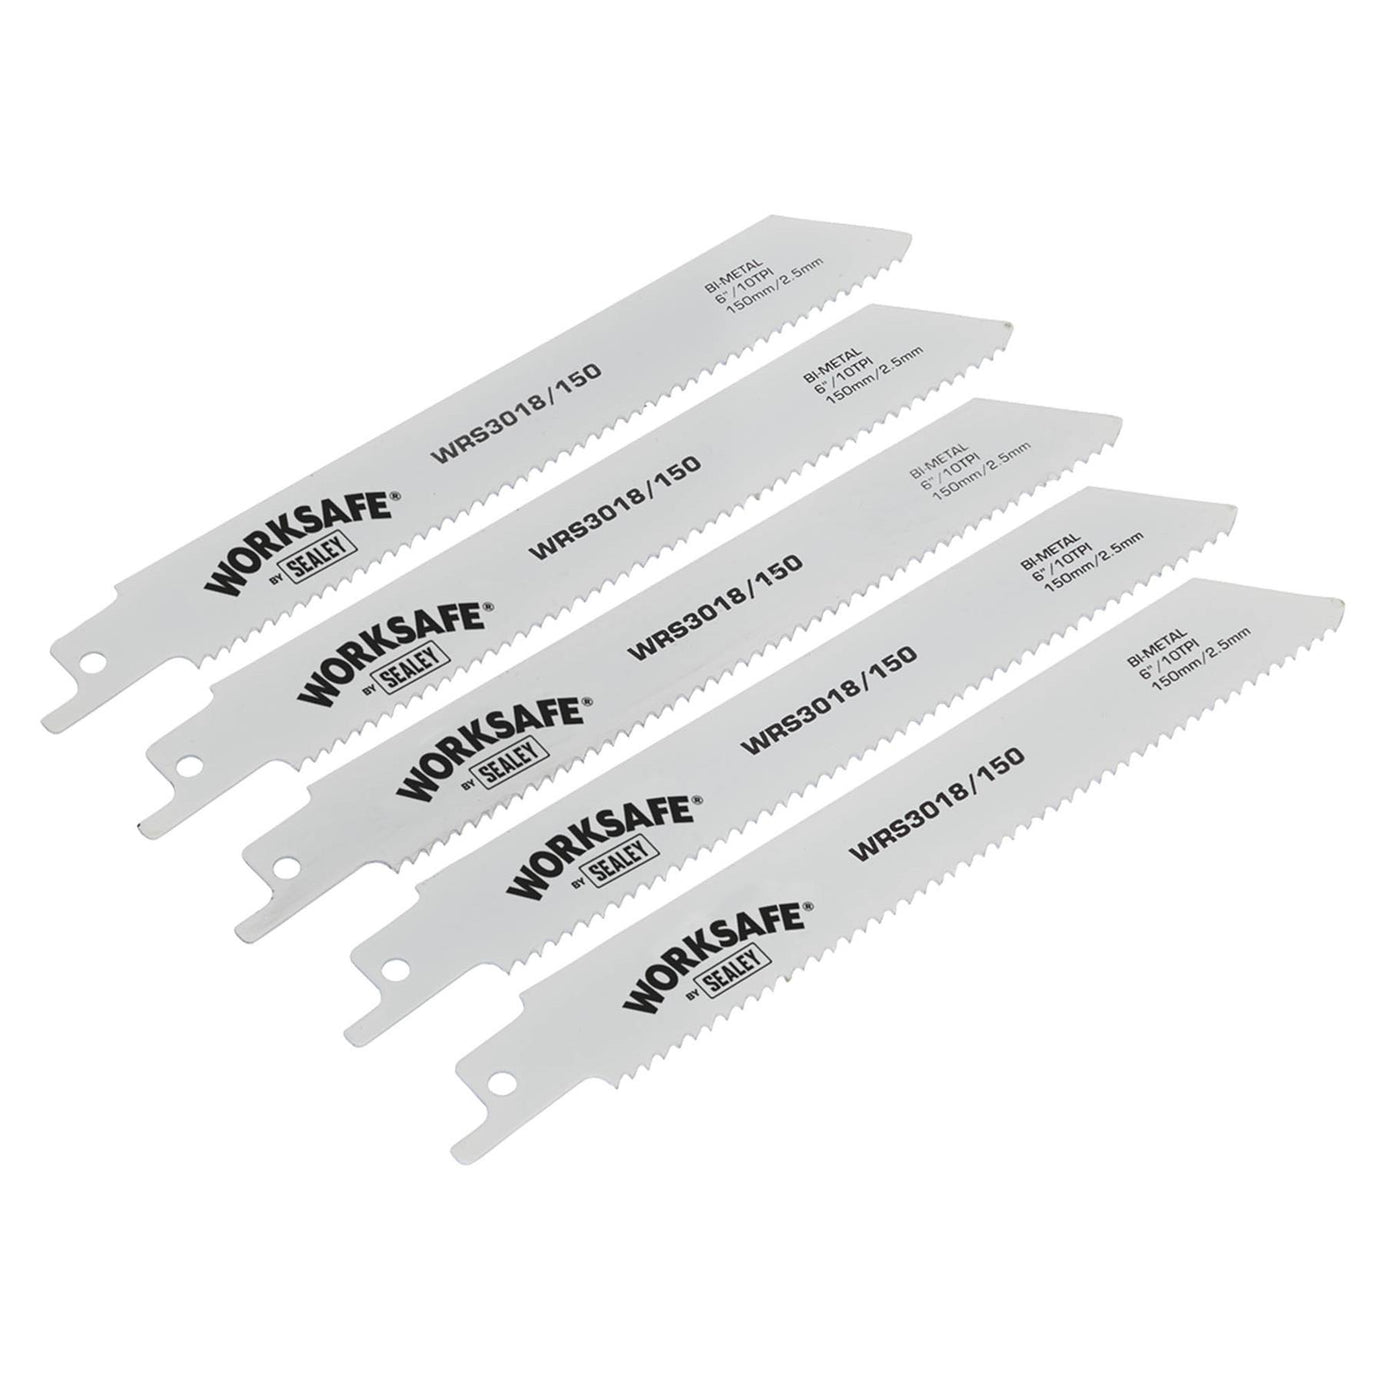 Sealey Reciprocating Saw Blade 150mm 10tpi - Pack of 5